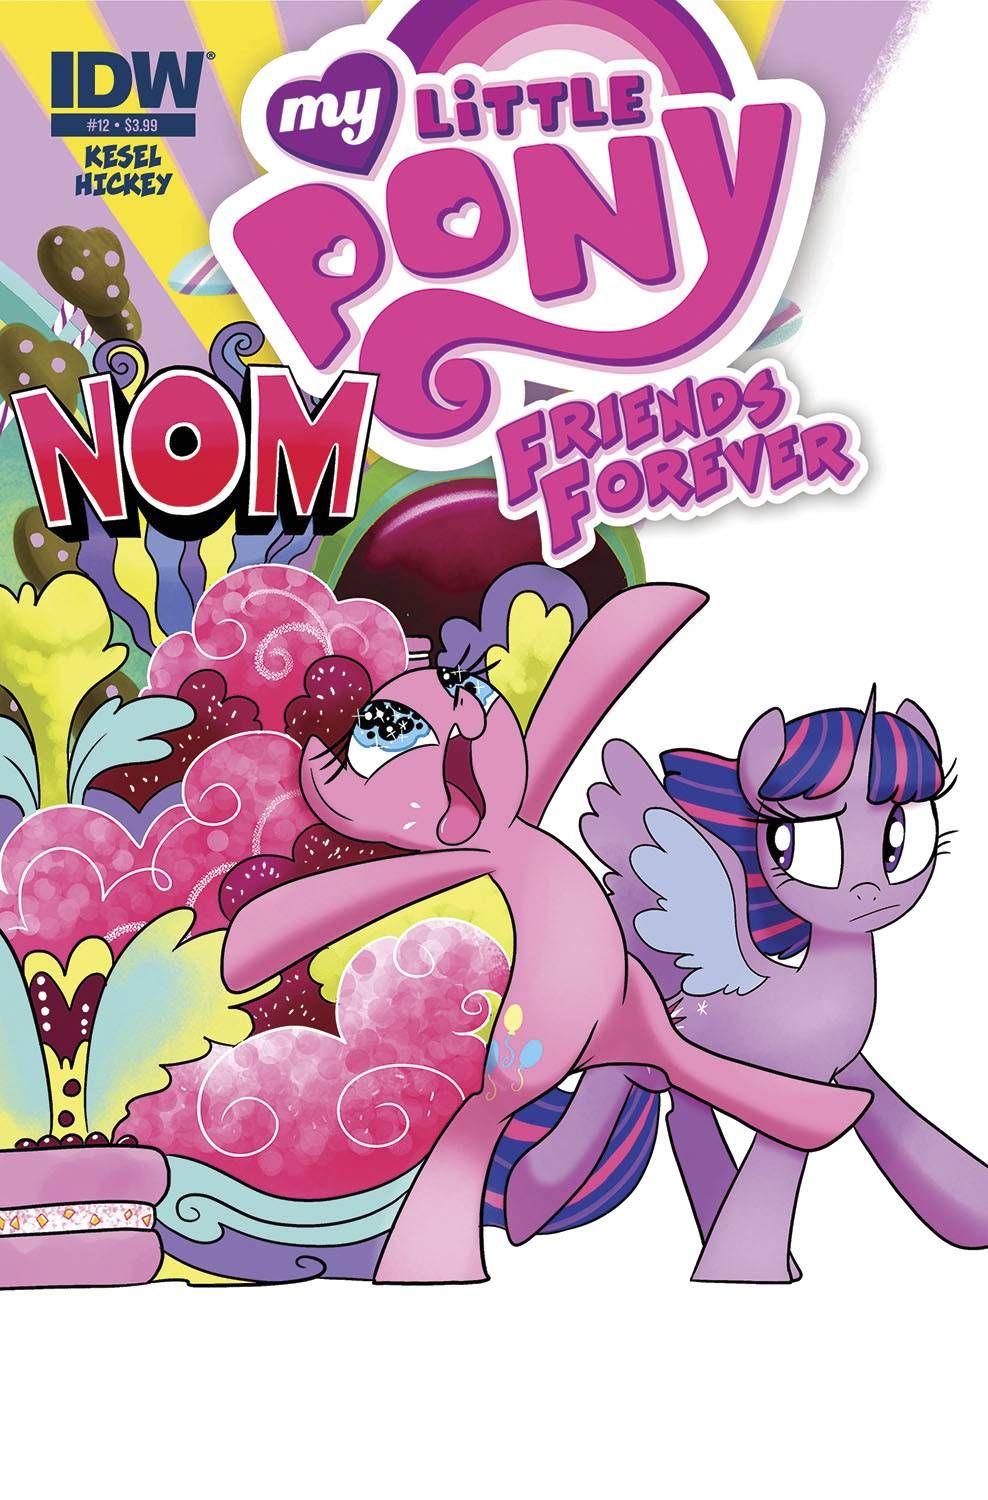 My Little Pony Friends Forever #12 Comic